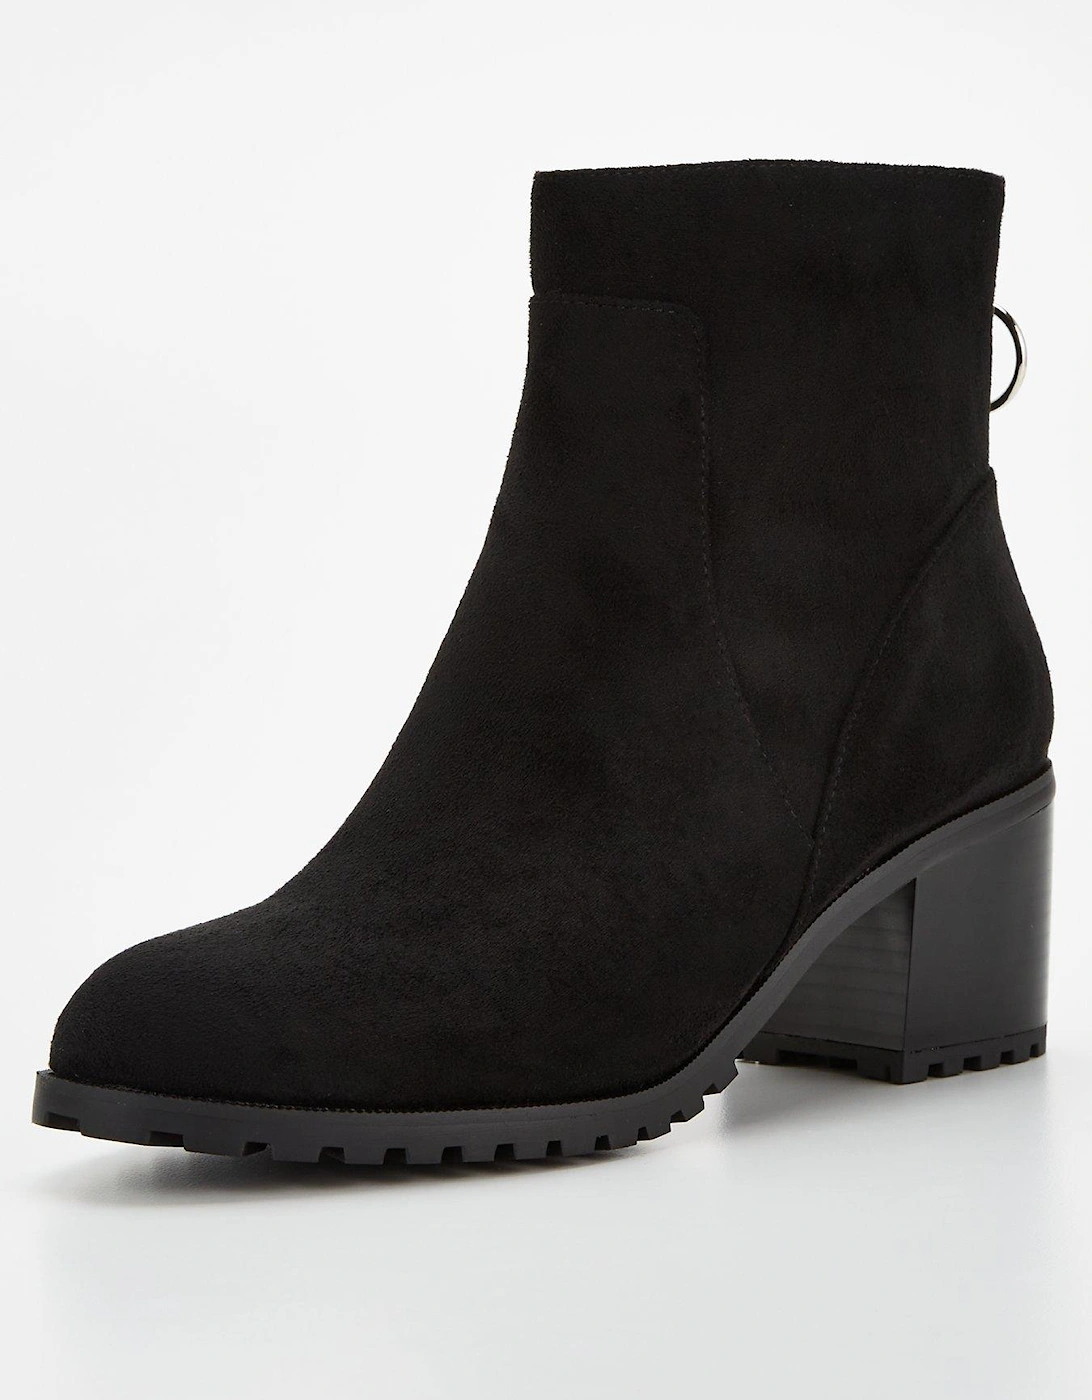 CASUAL BLOCK HEEL ANKLE BOOT WITH BACK ZIP - Black